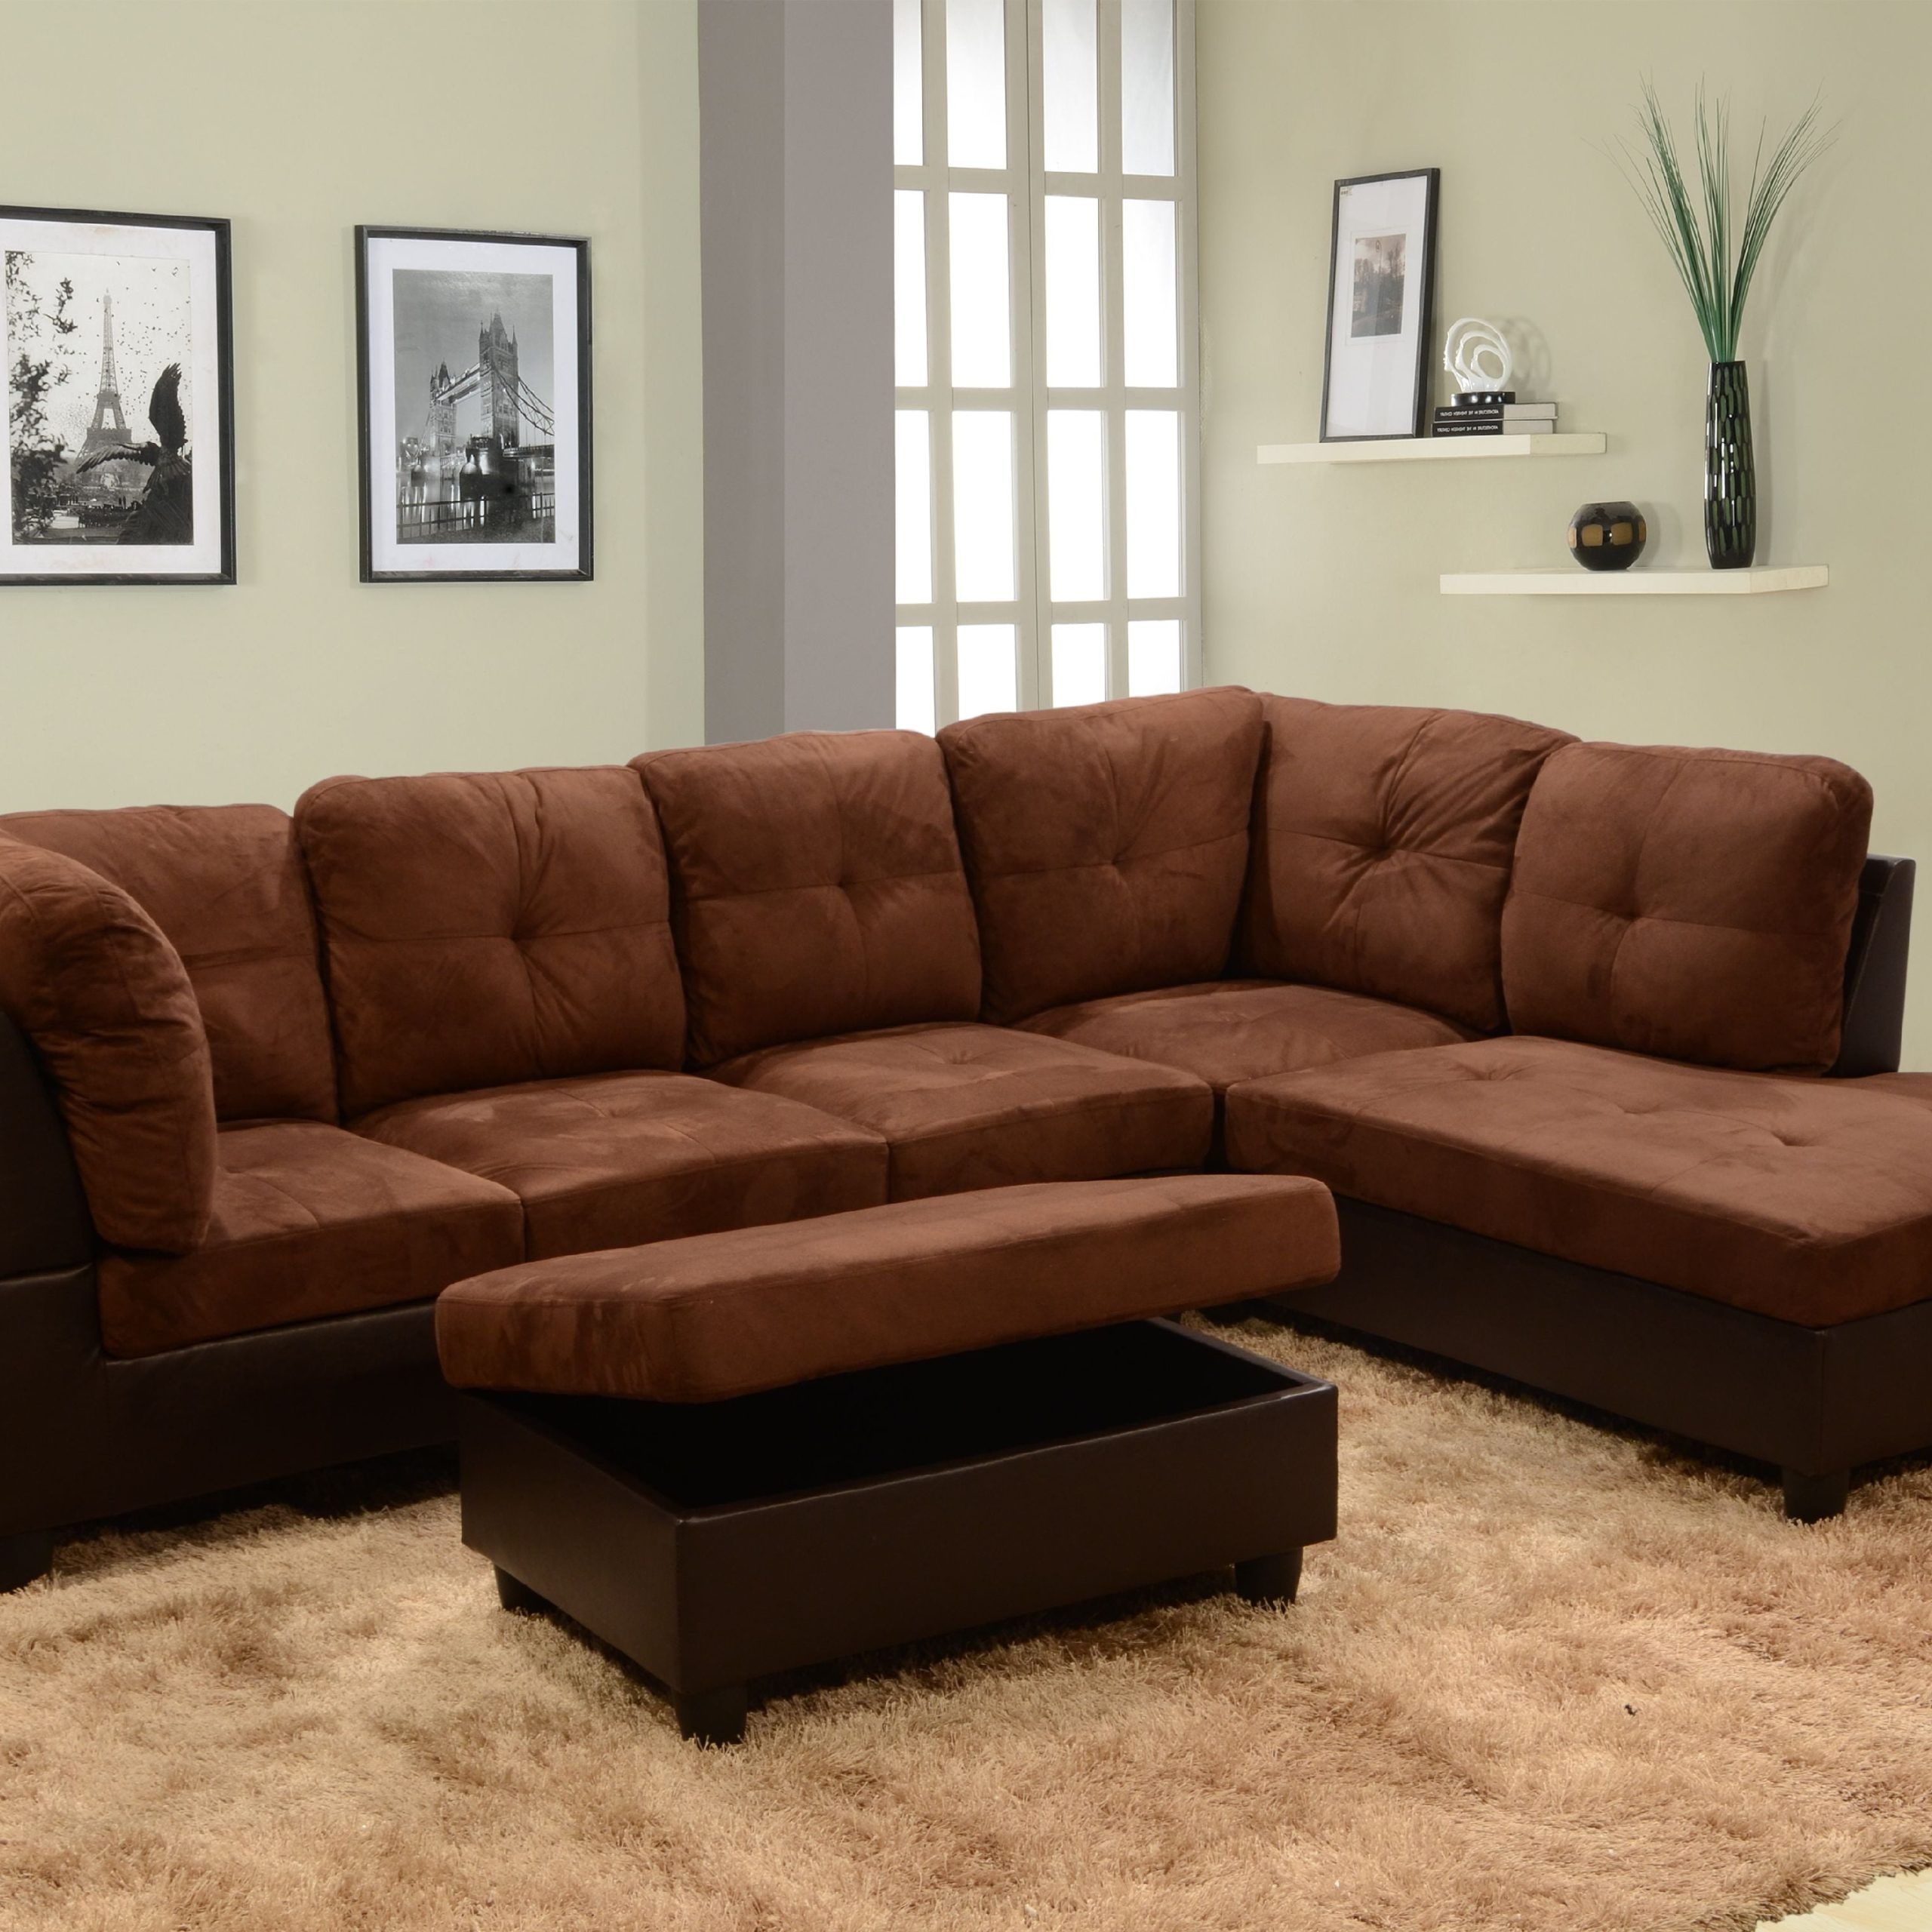 Matt Right Facing Sectional Sofa With Ottoman,chocolate – Walmart Regarding Sofas In Chocolate Brown (View 7 of 20)